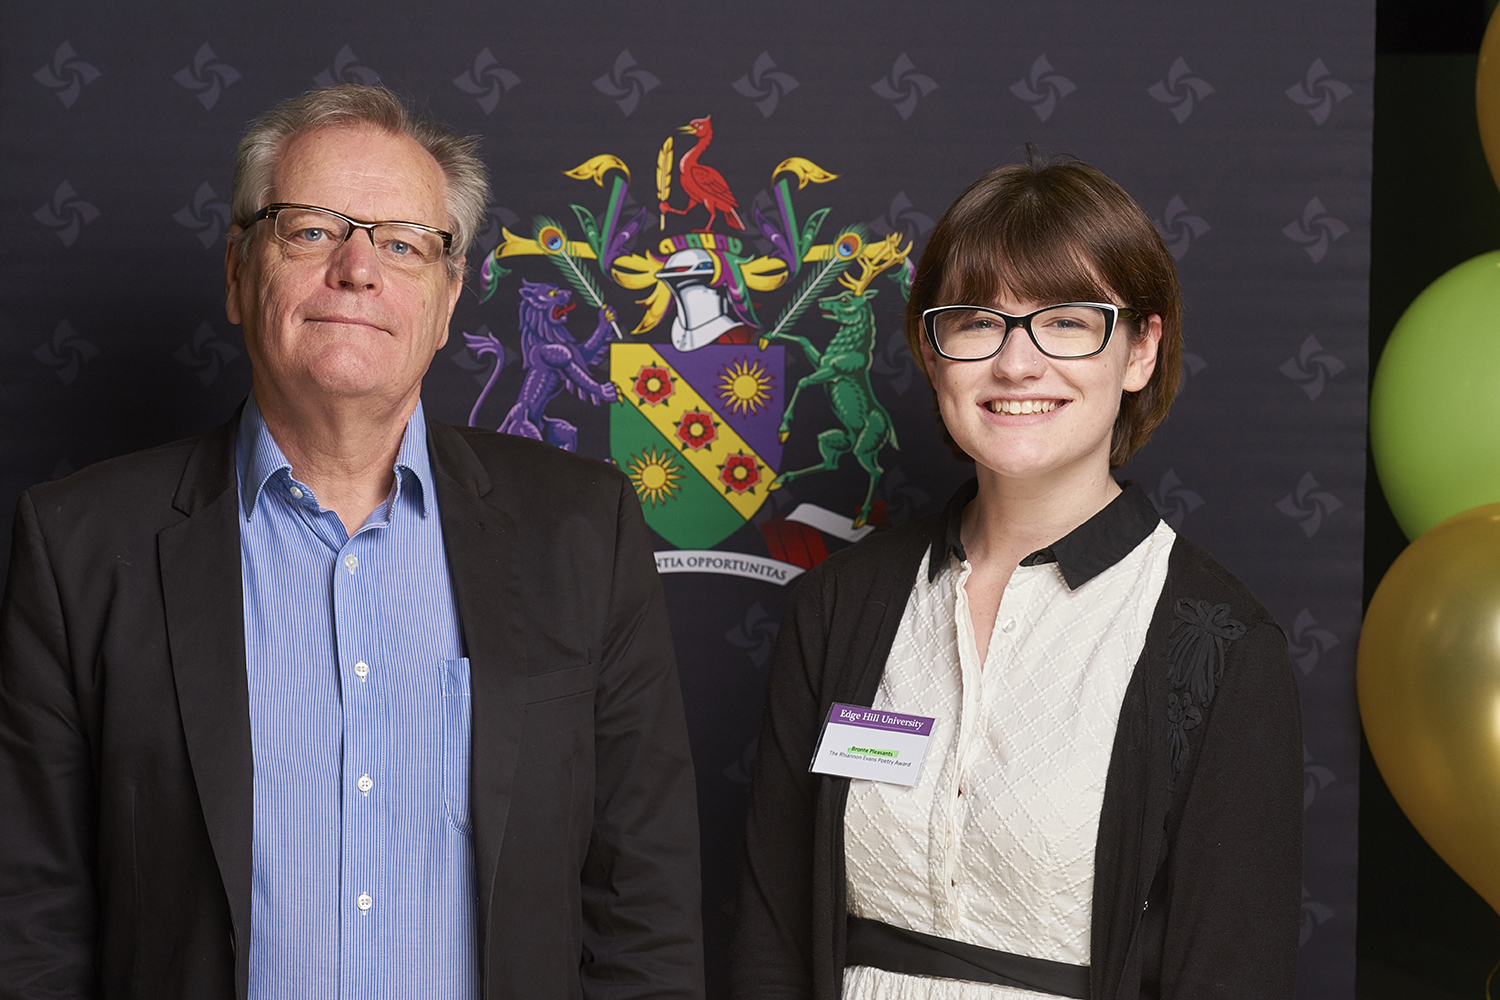 Rhiannon Evans Poetry Award scholar Bronte Pleasants, with lecturer Robert Sheppard, at a Scholarship Awards Evening.